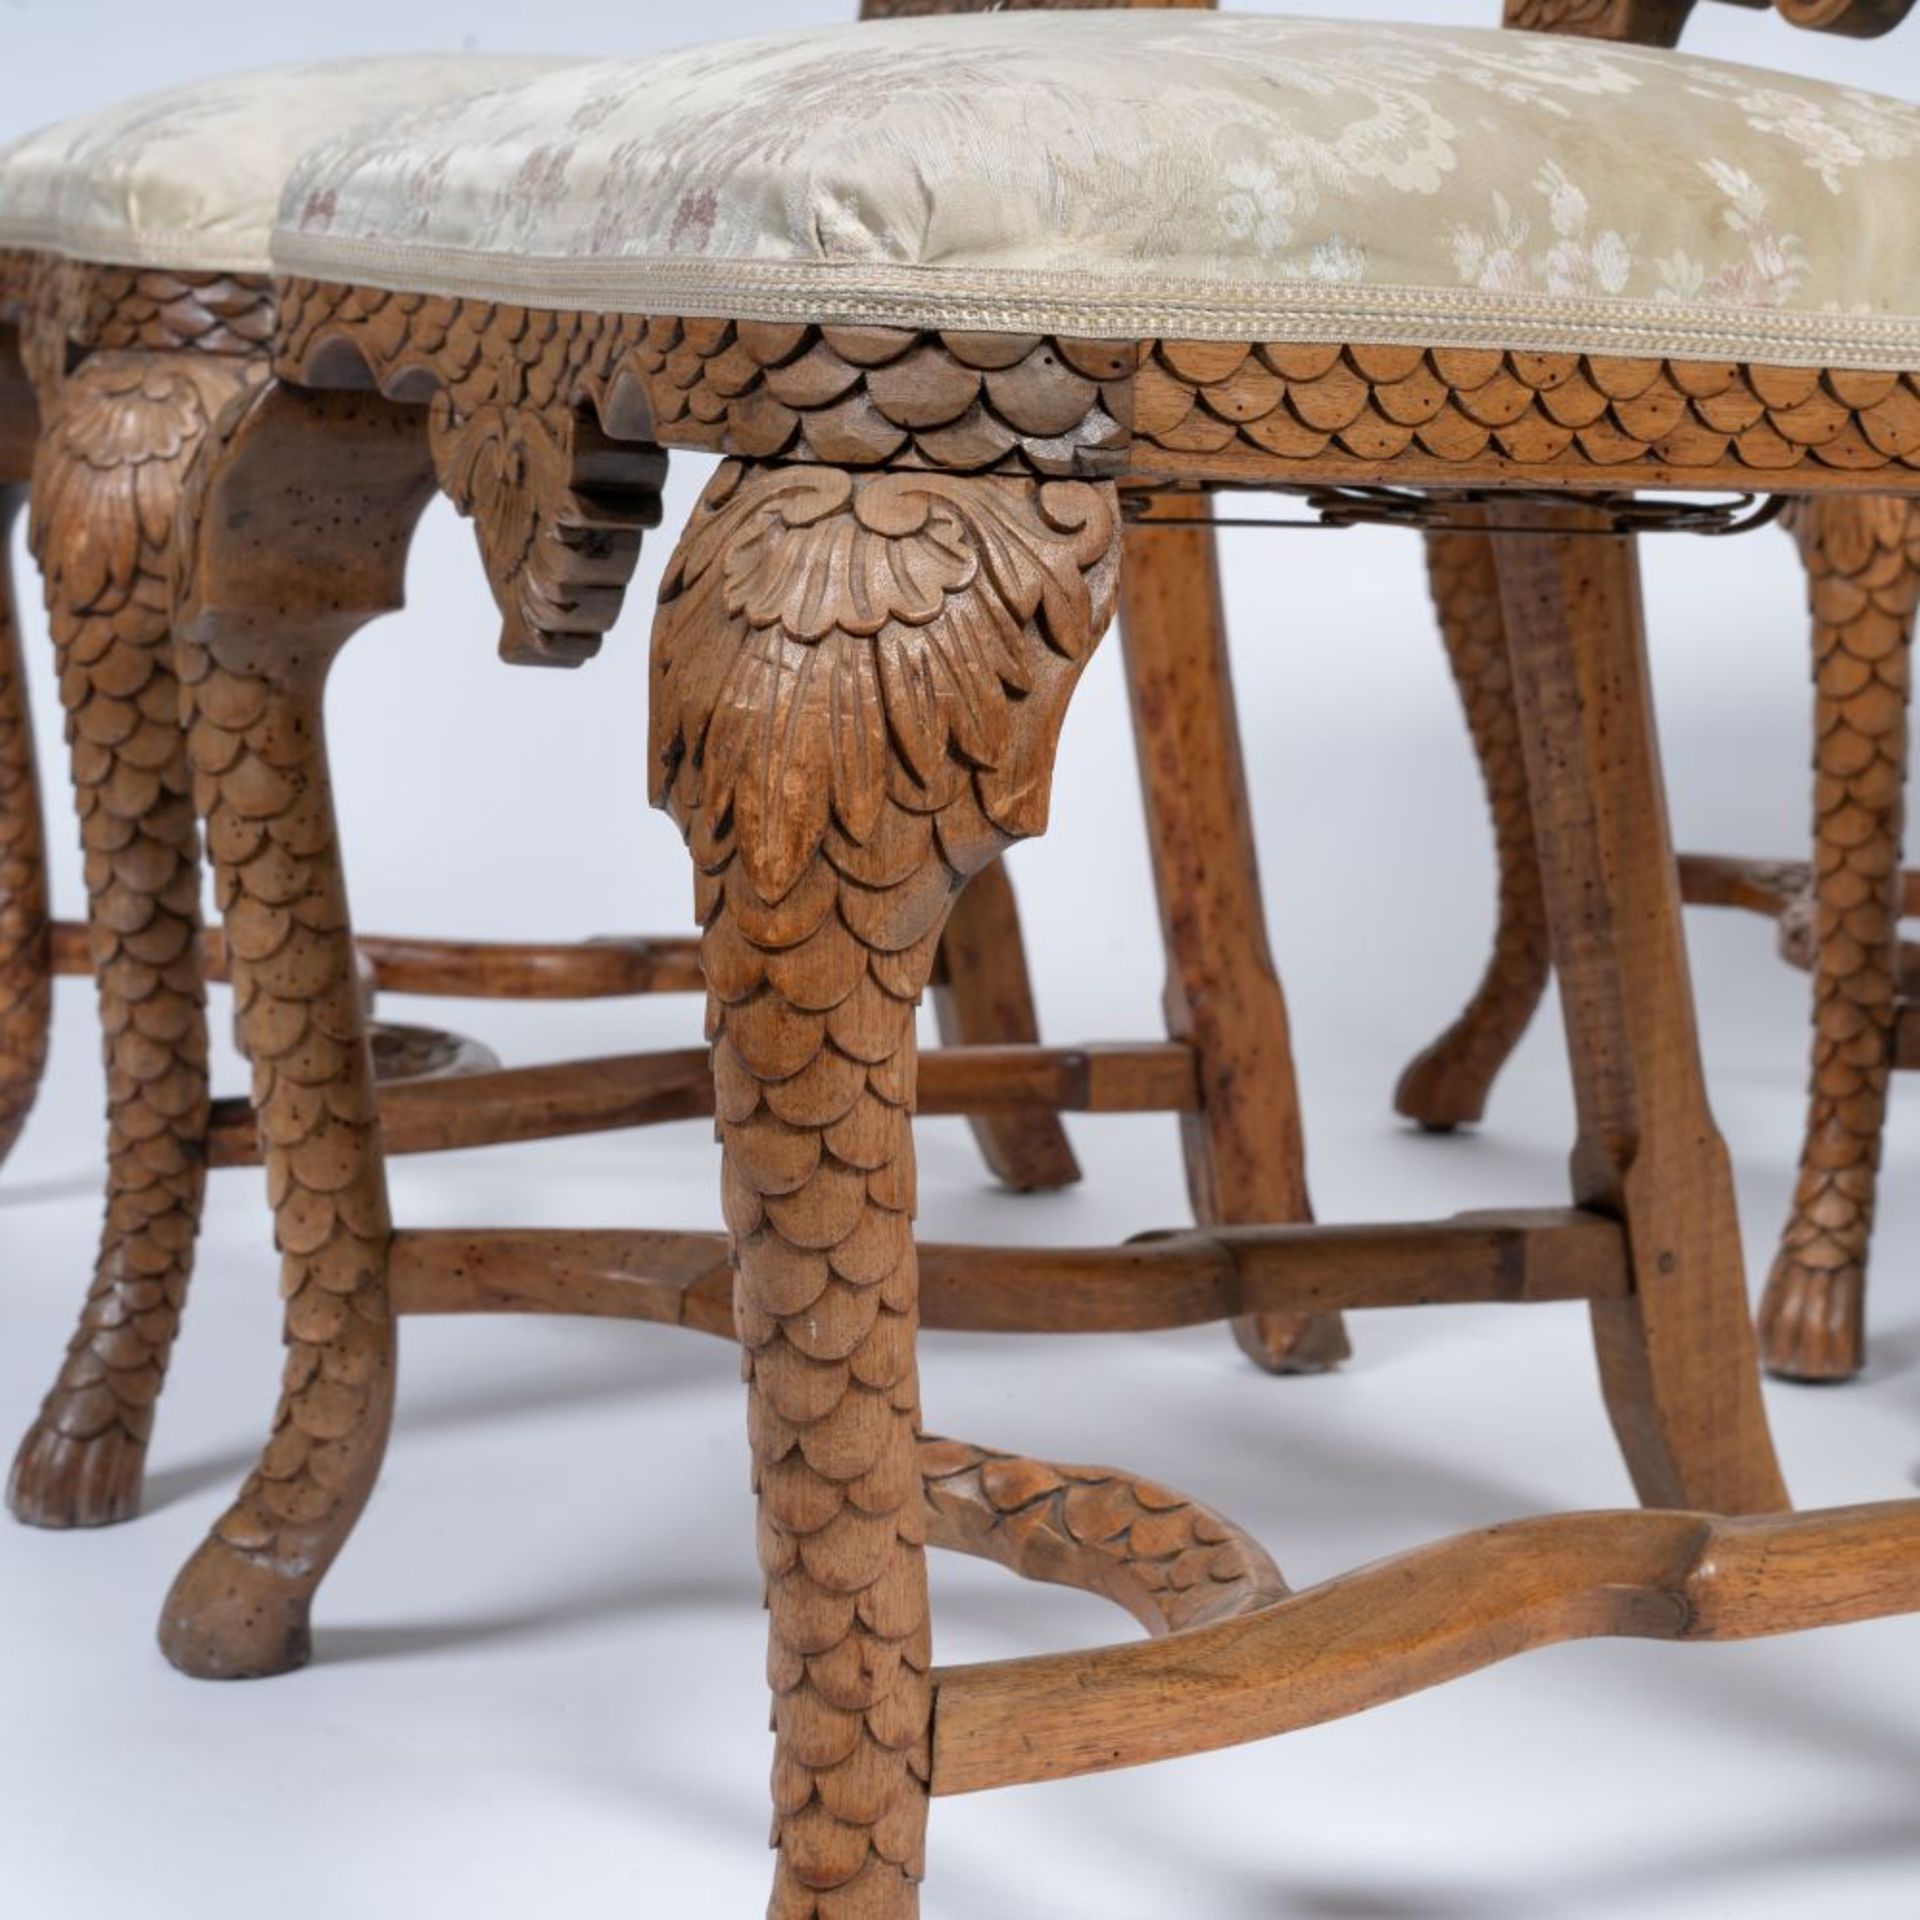 A Set of 4 Rococo Chairs with rare Scale Carving. - Image 4 of 4